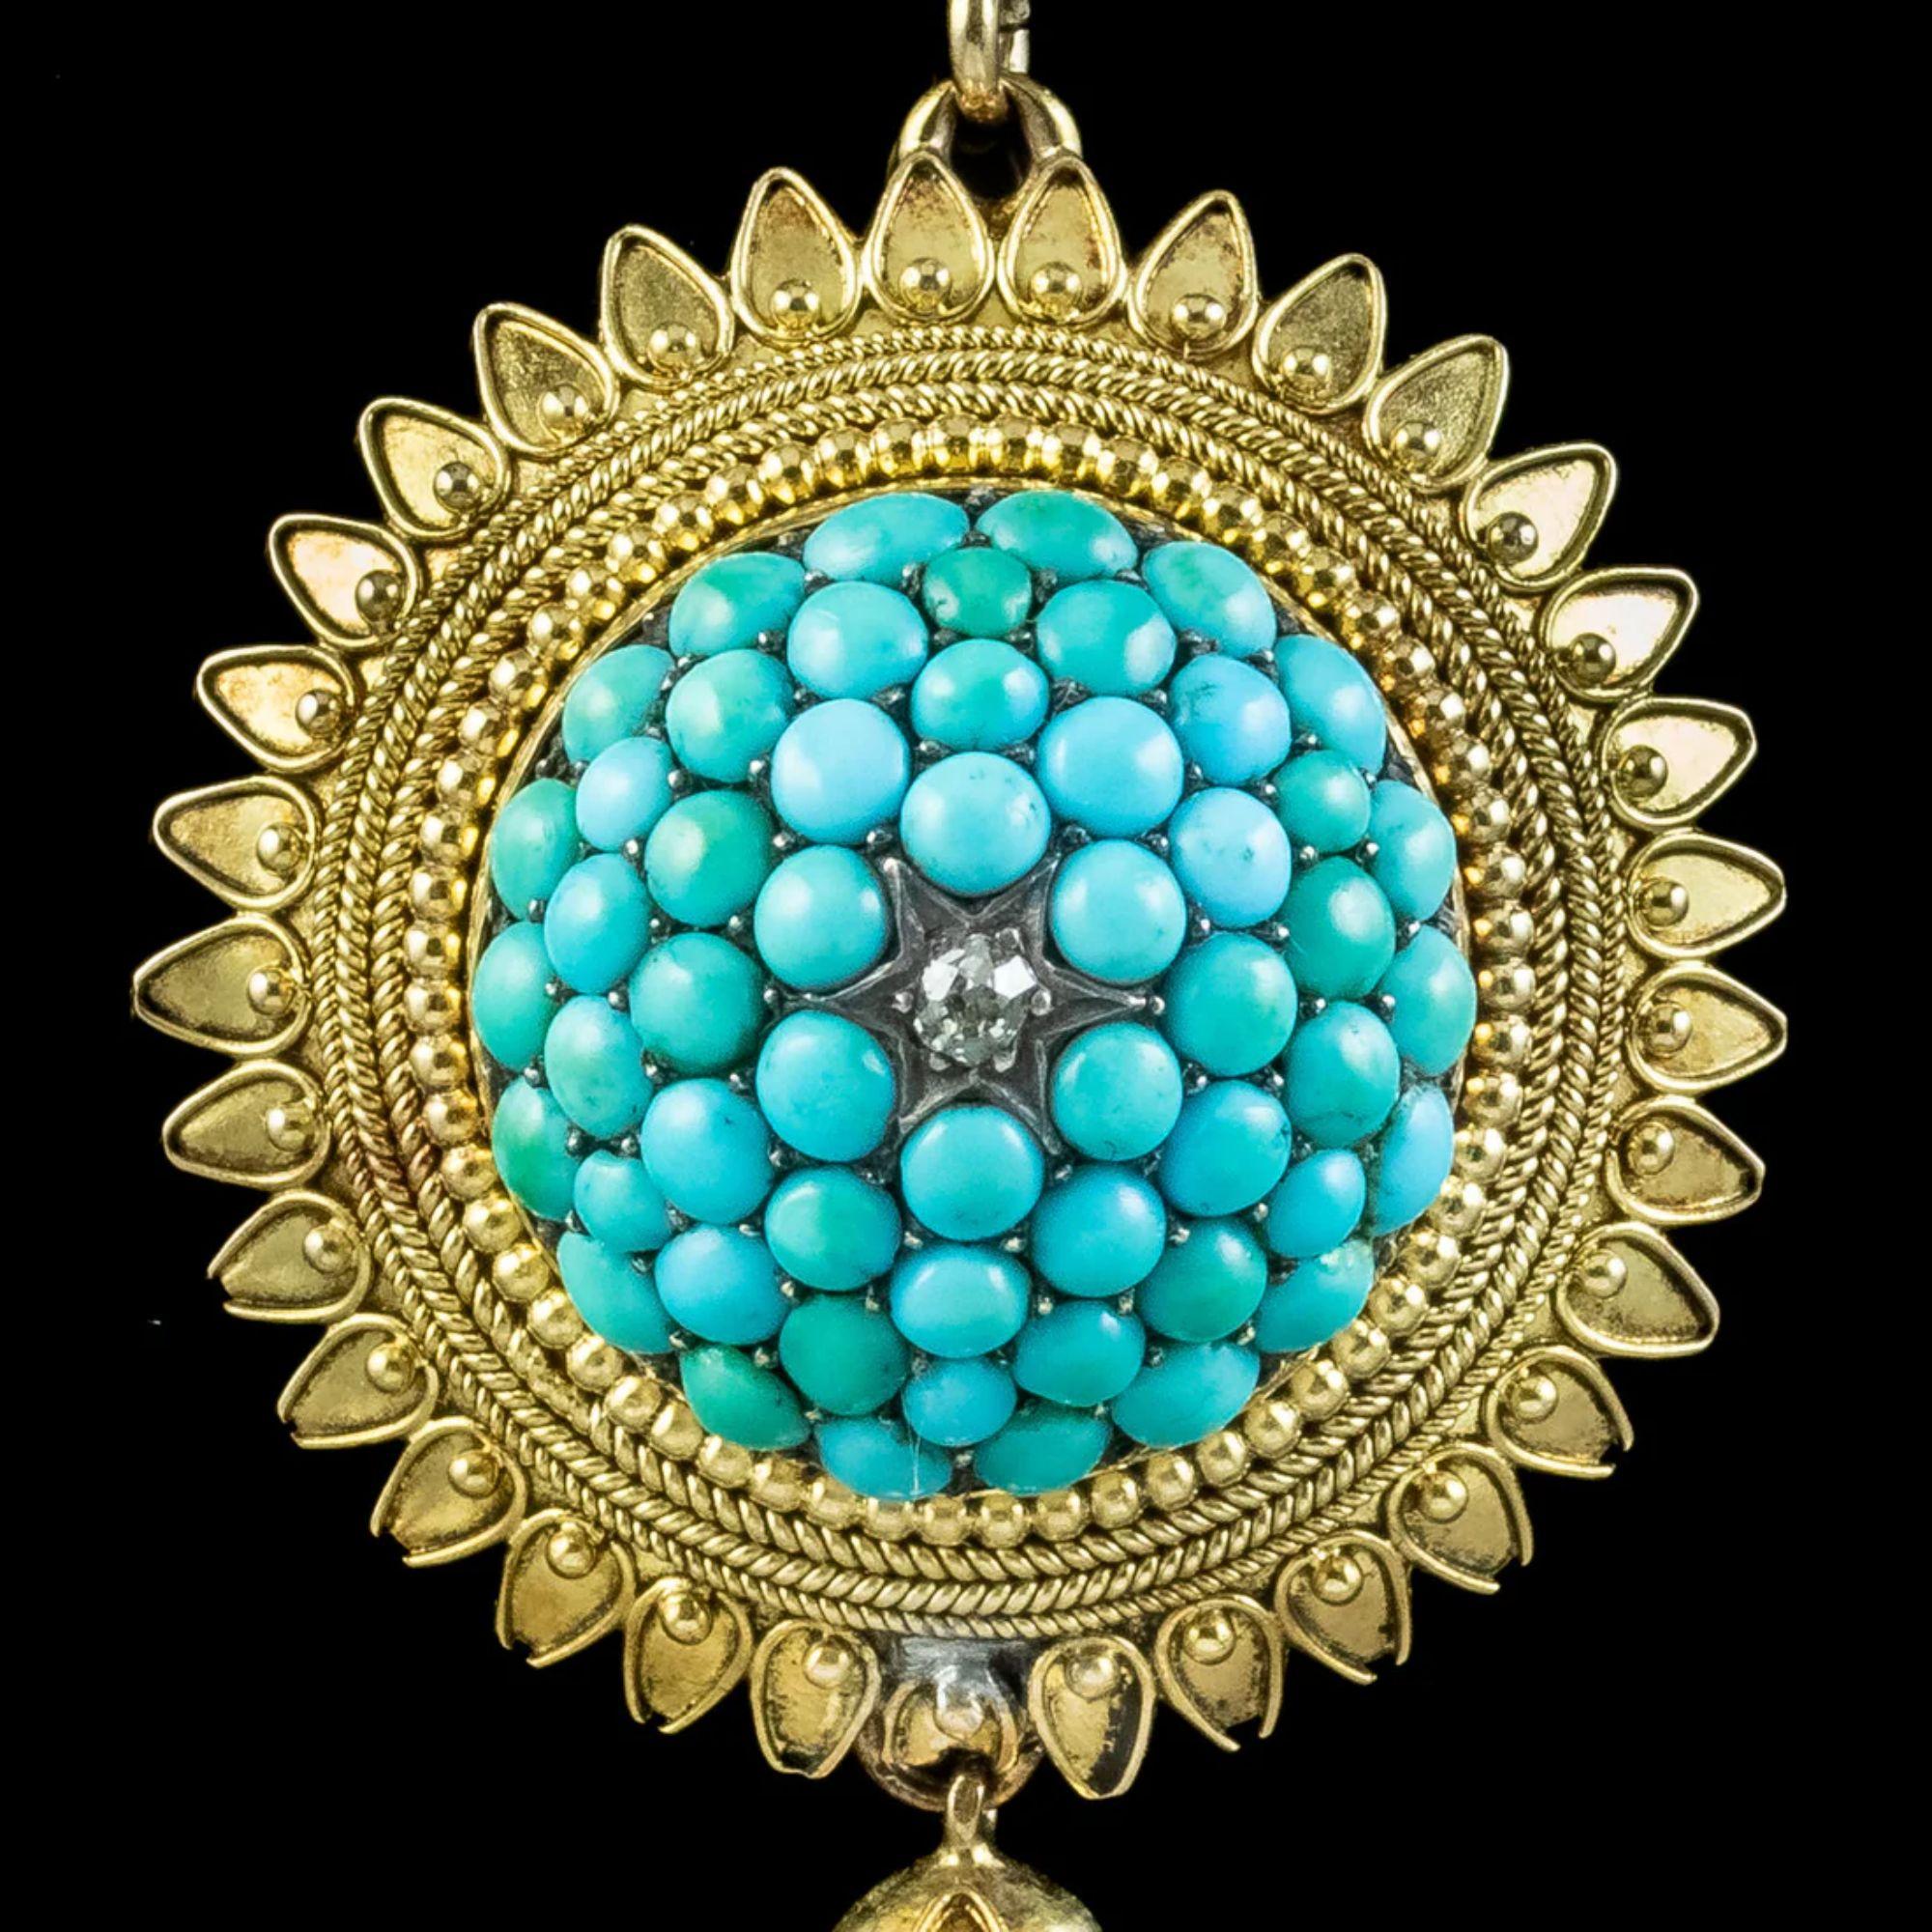 Antique Victorian Etruscan Turquoise Locket Pendant Necklace in 18 Carat Gold 1